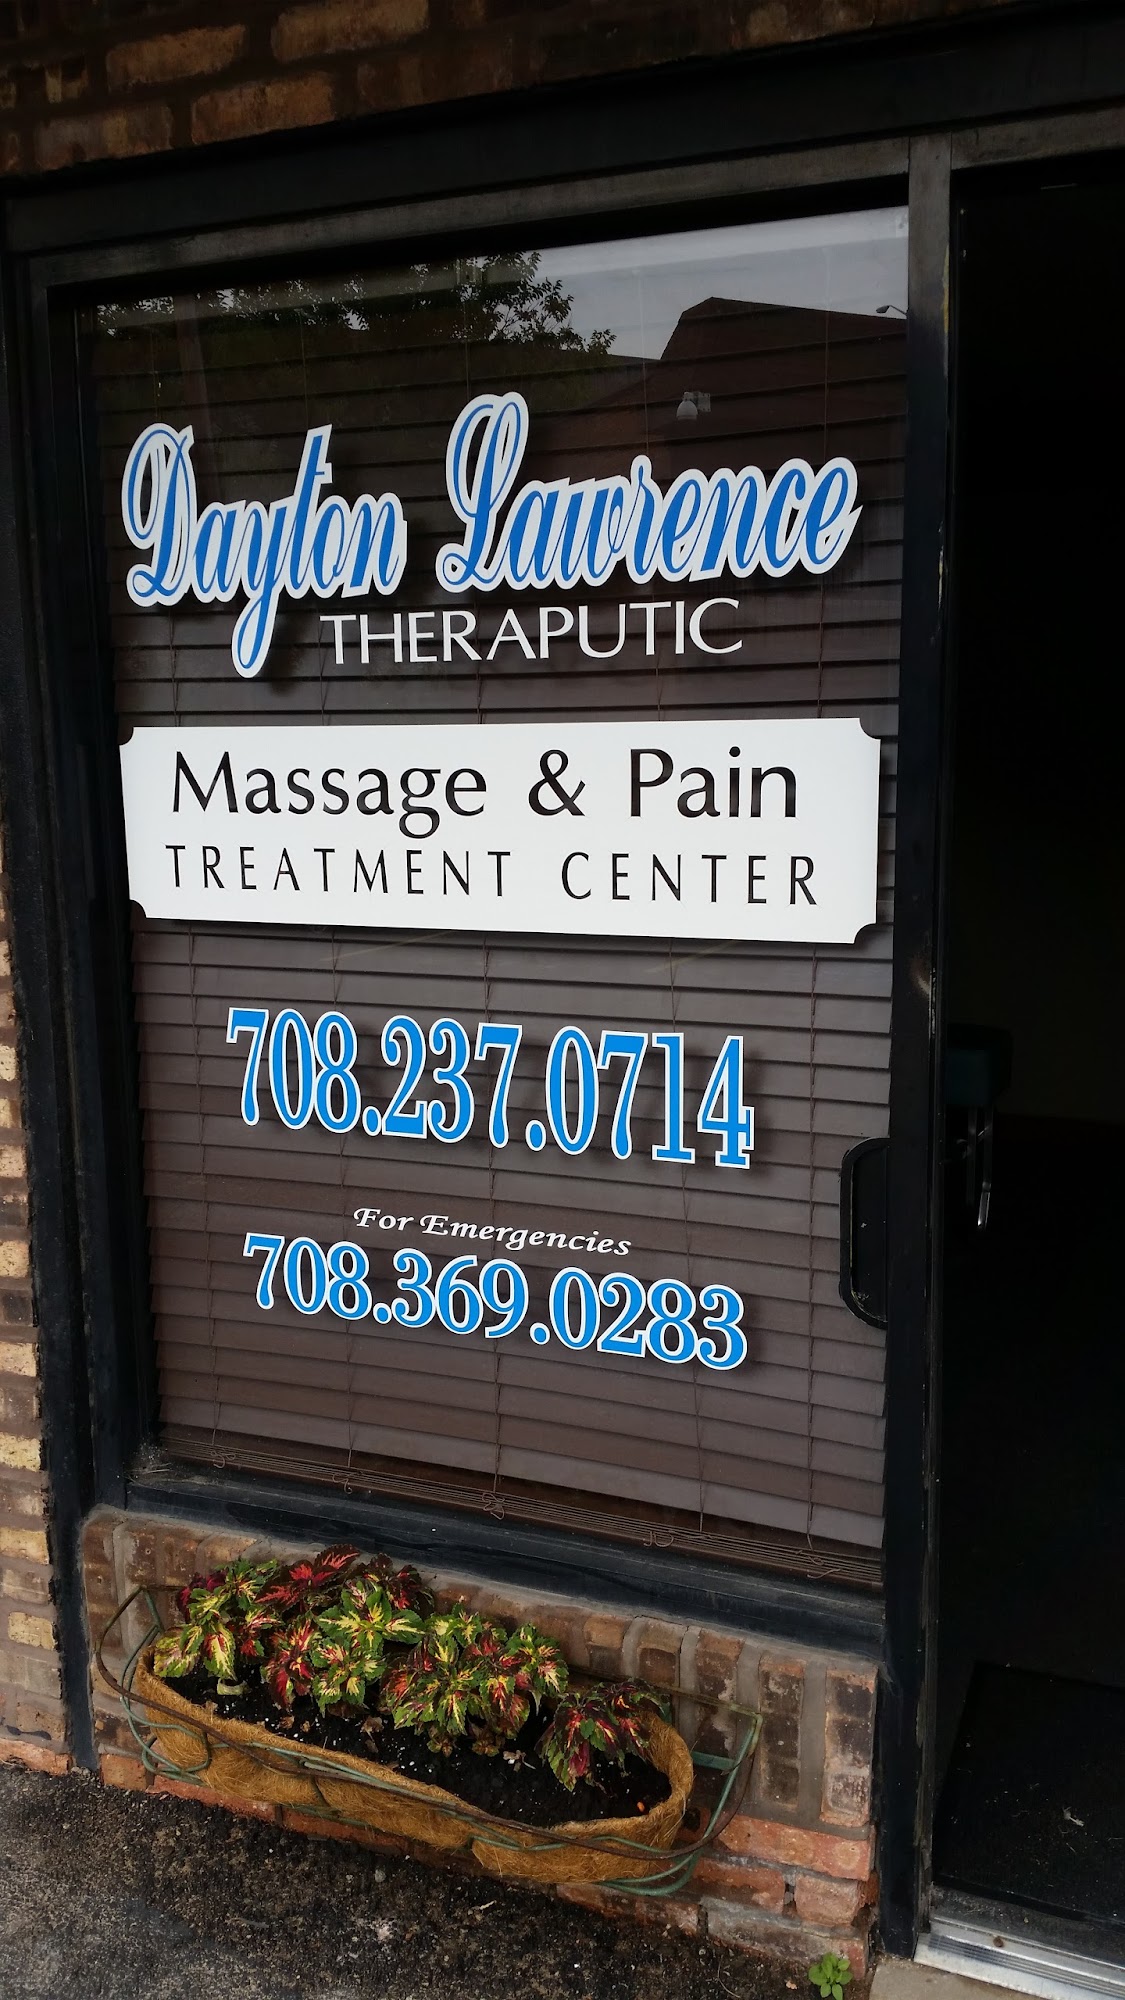 Dayton Lawrence Therapeutic Massage 8265 Archer Ave Suite 2100, Willow Springs Illinois 60480